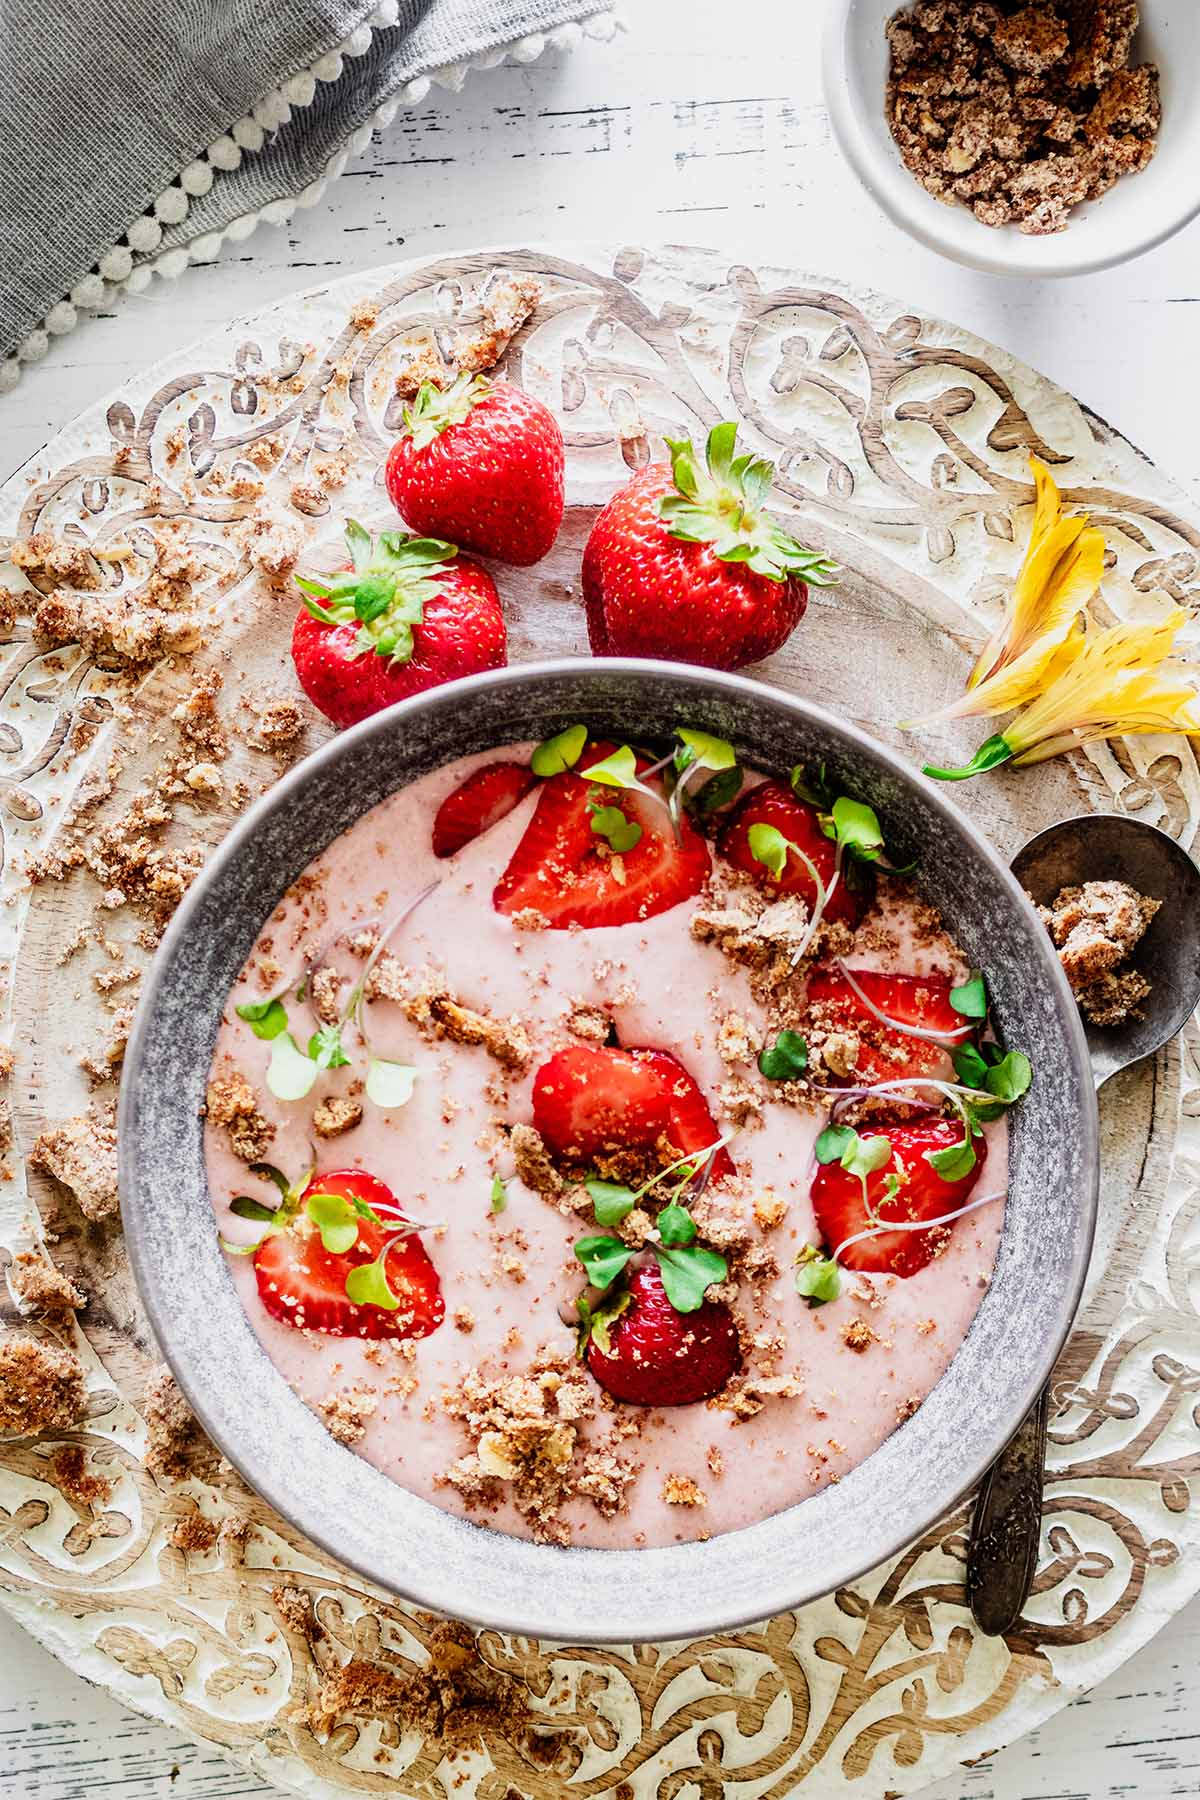 Strawberry banana smoothie bowl topped with sliced ​​strawberries, crumble, and micro greens in a gray bowl with fresh whole strawberries off to the side.